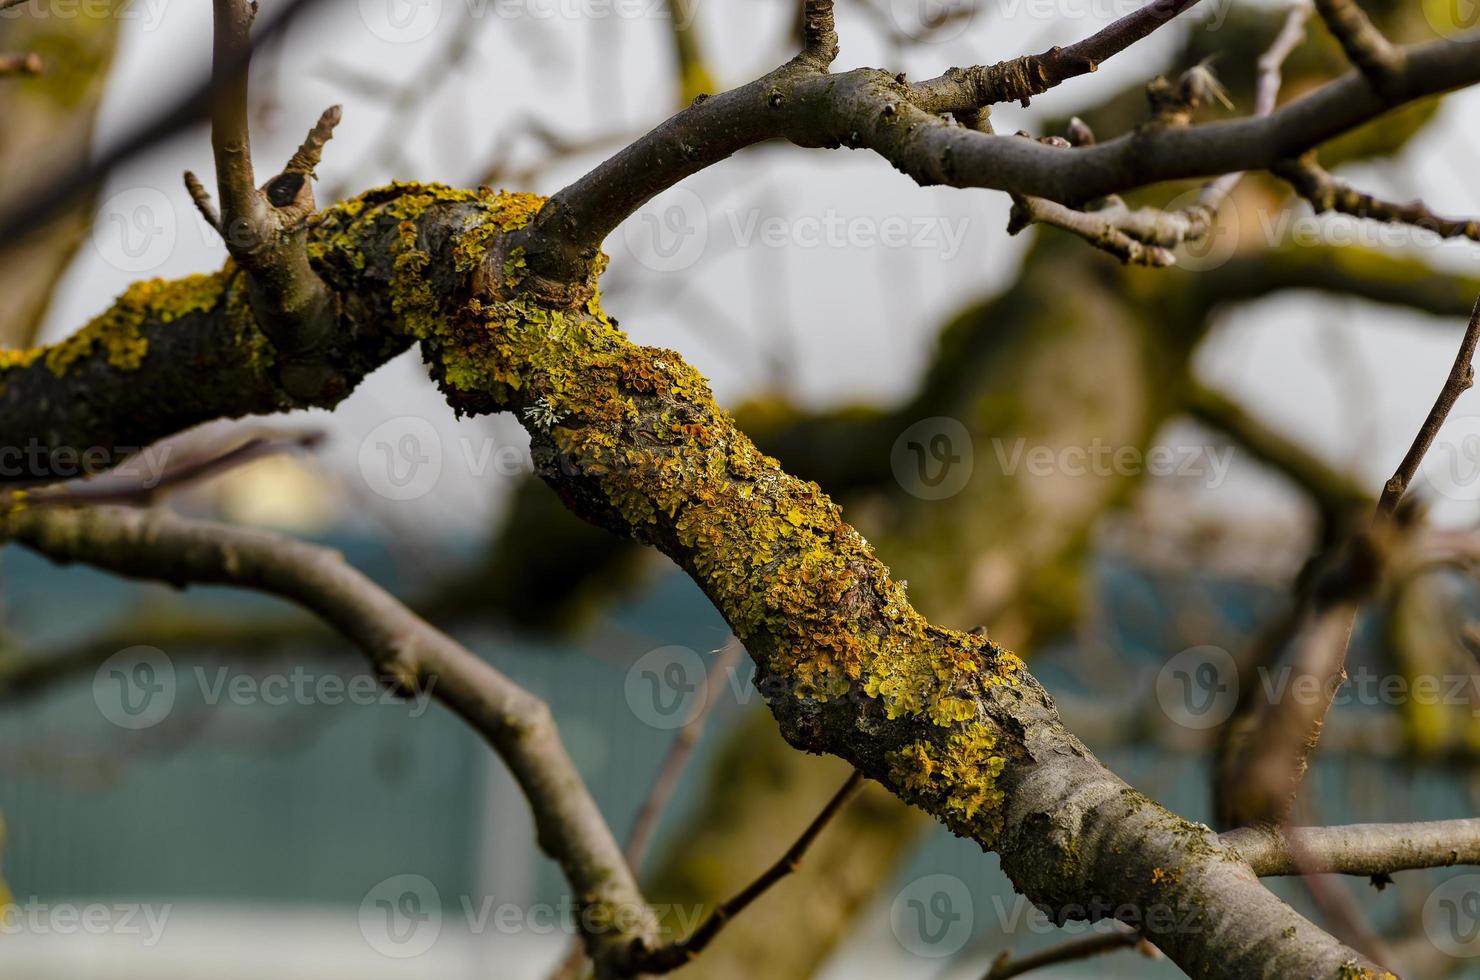 lichen on a tree branch lichen is a complex organism that arises from algae or cyanobacteria. photo